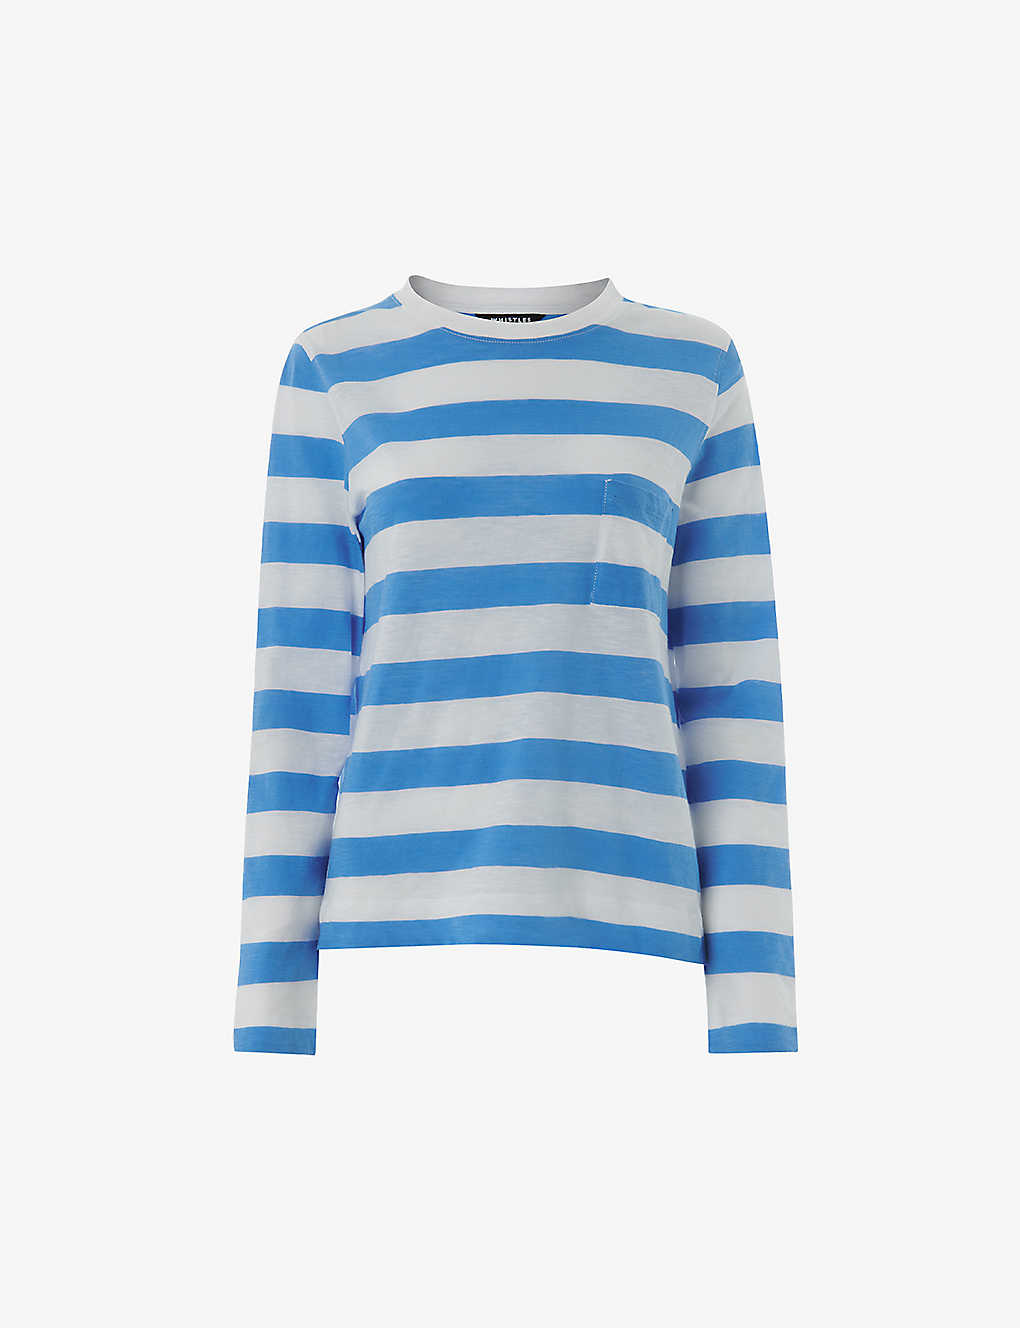 Whistles Cotton Striped Pocket Top In Multi-coloured